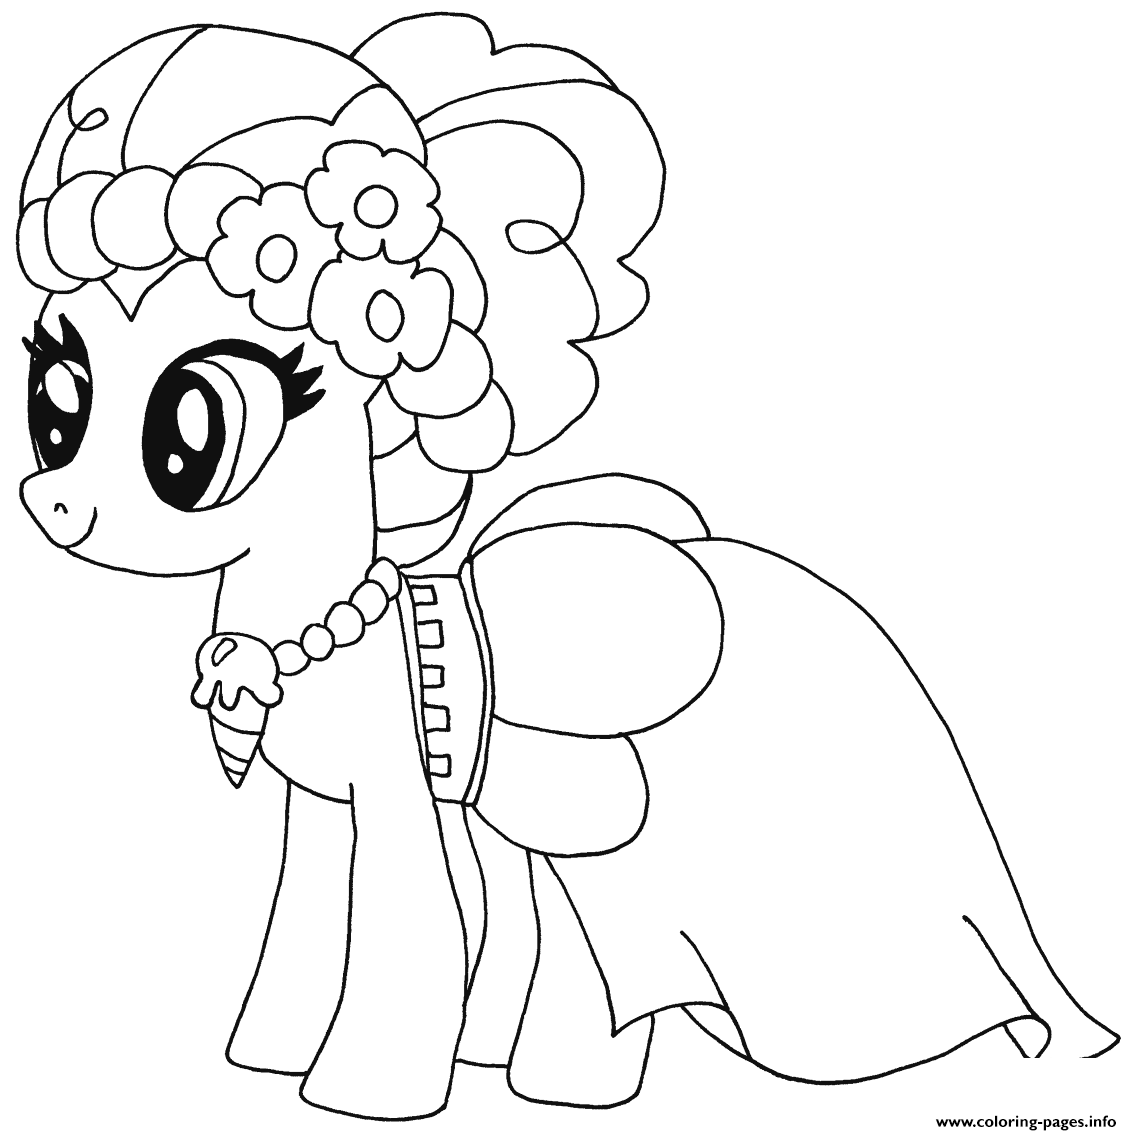 Pinkie Pie My Little Pony coloring